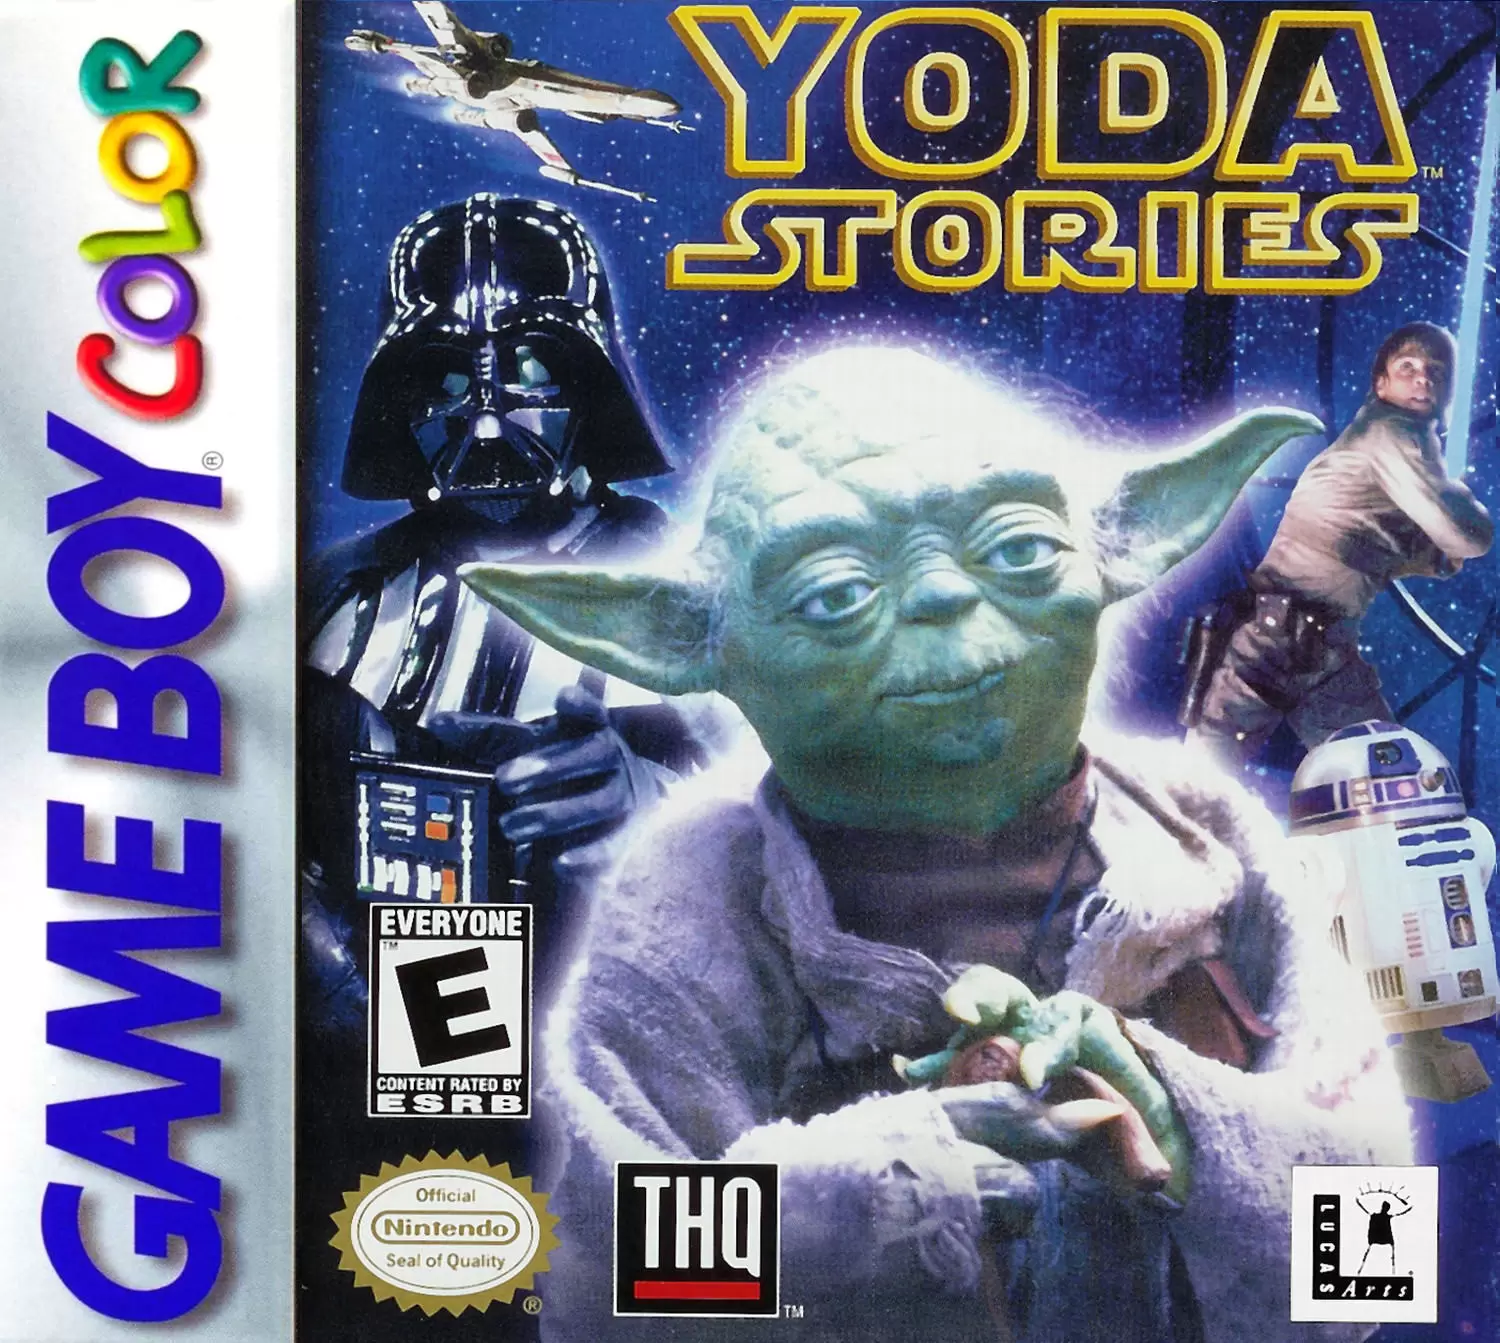 Game Boy Color Games - Star Wars: Yoda Stories